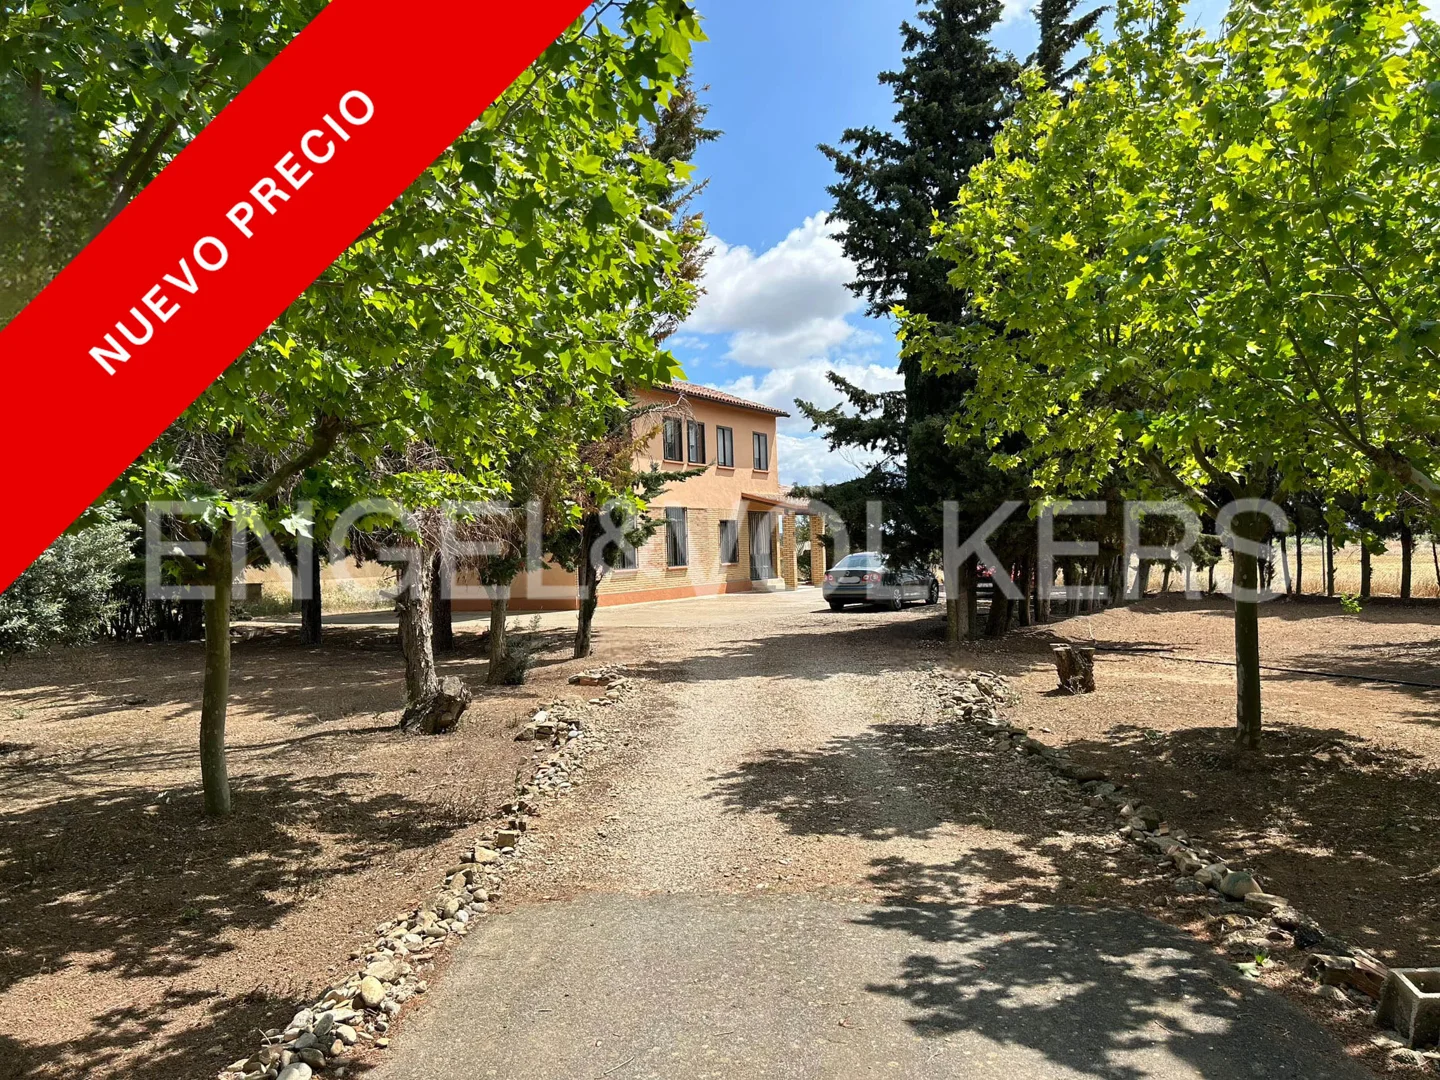 Detached House & large Land between Caparroso and Olite